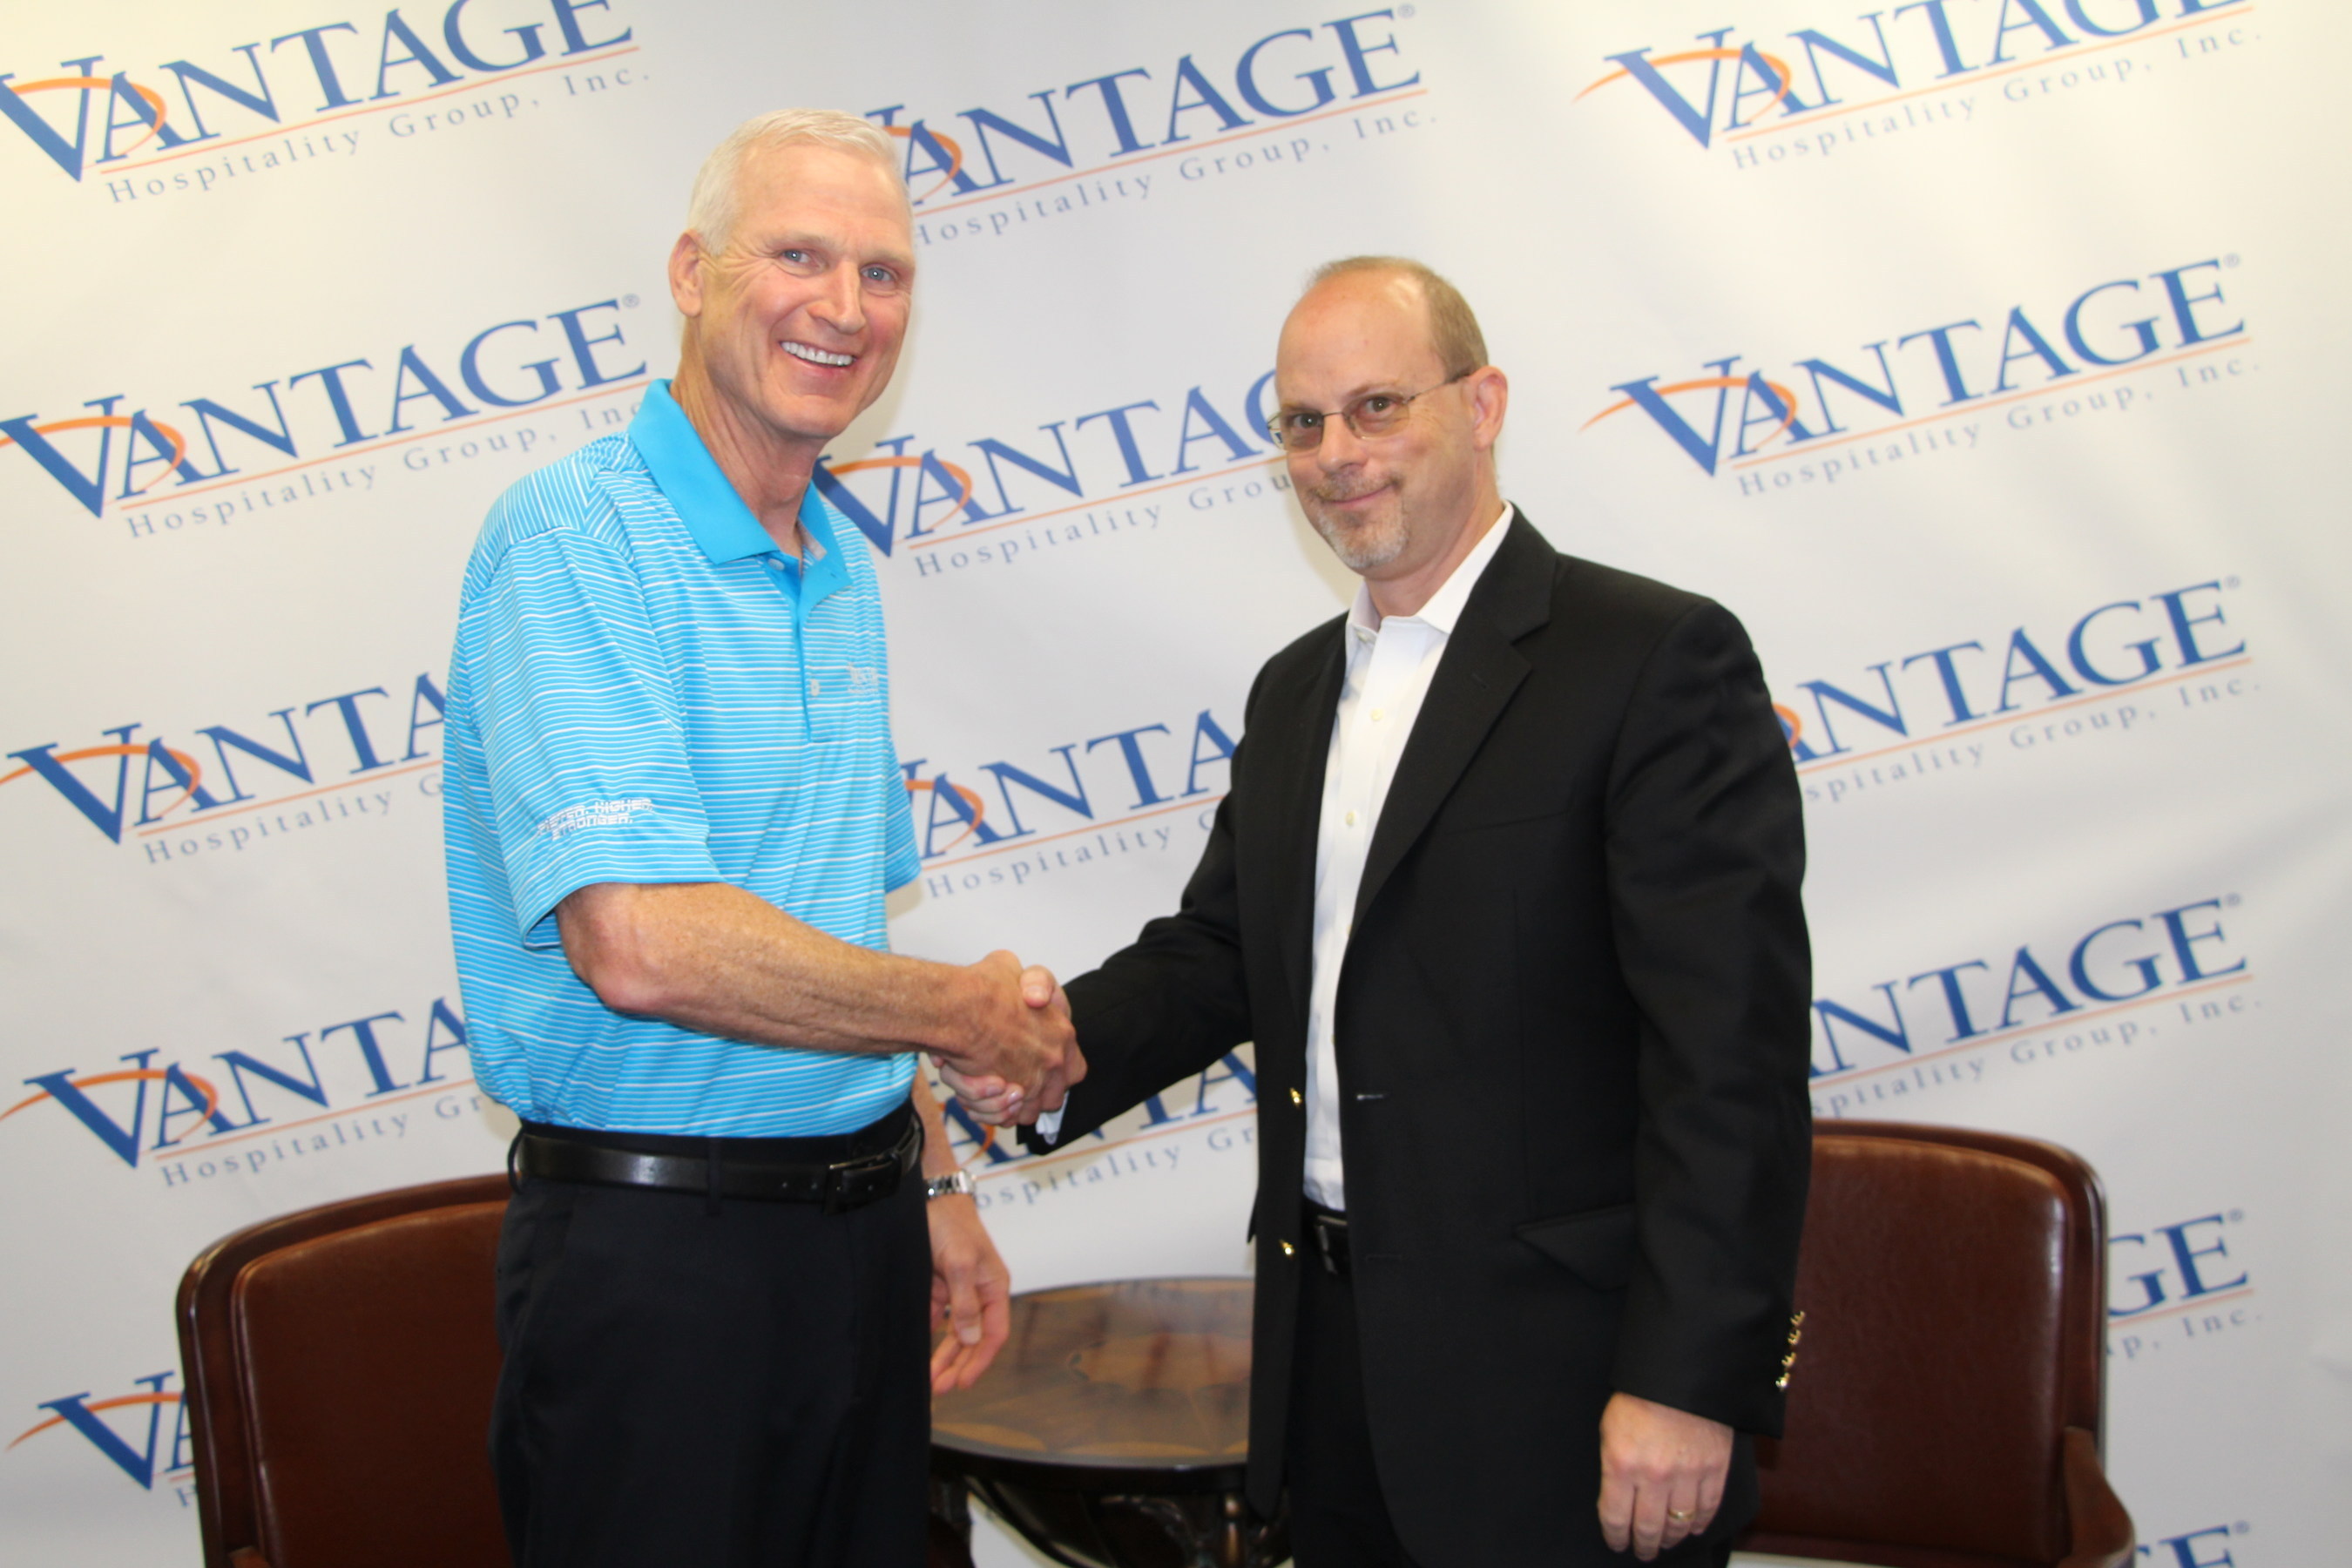 Vantage Hospitality President & CEO Roger Bloss (left) with America's Best Franchising President & CEO Sterling Stoudenmire after announcing that Vantage has agreed to acquire ABF's hotel brands - America's Best Inns & Suites, Country Hearth Inns & Suites, Jameson Inn, Jameson Suites, Signature Inn, and 3 Palms Hotels & Resorts, and ABF's license for the Budgetel Inns & Suites brand. (PRNewsFoto/Vantage Hospitality)